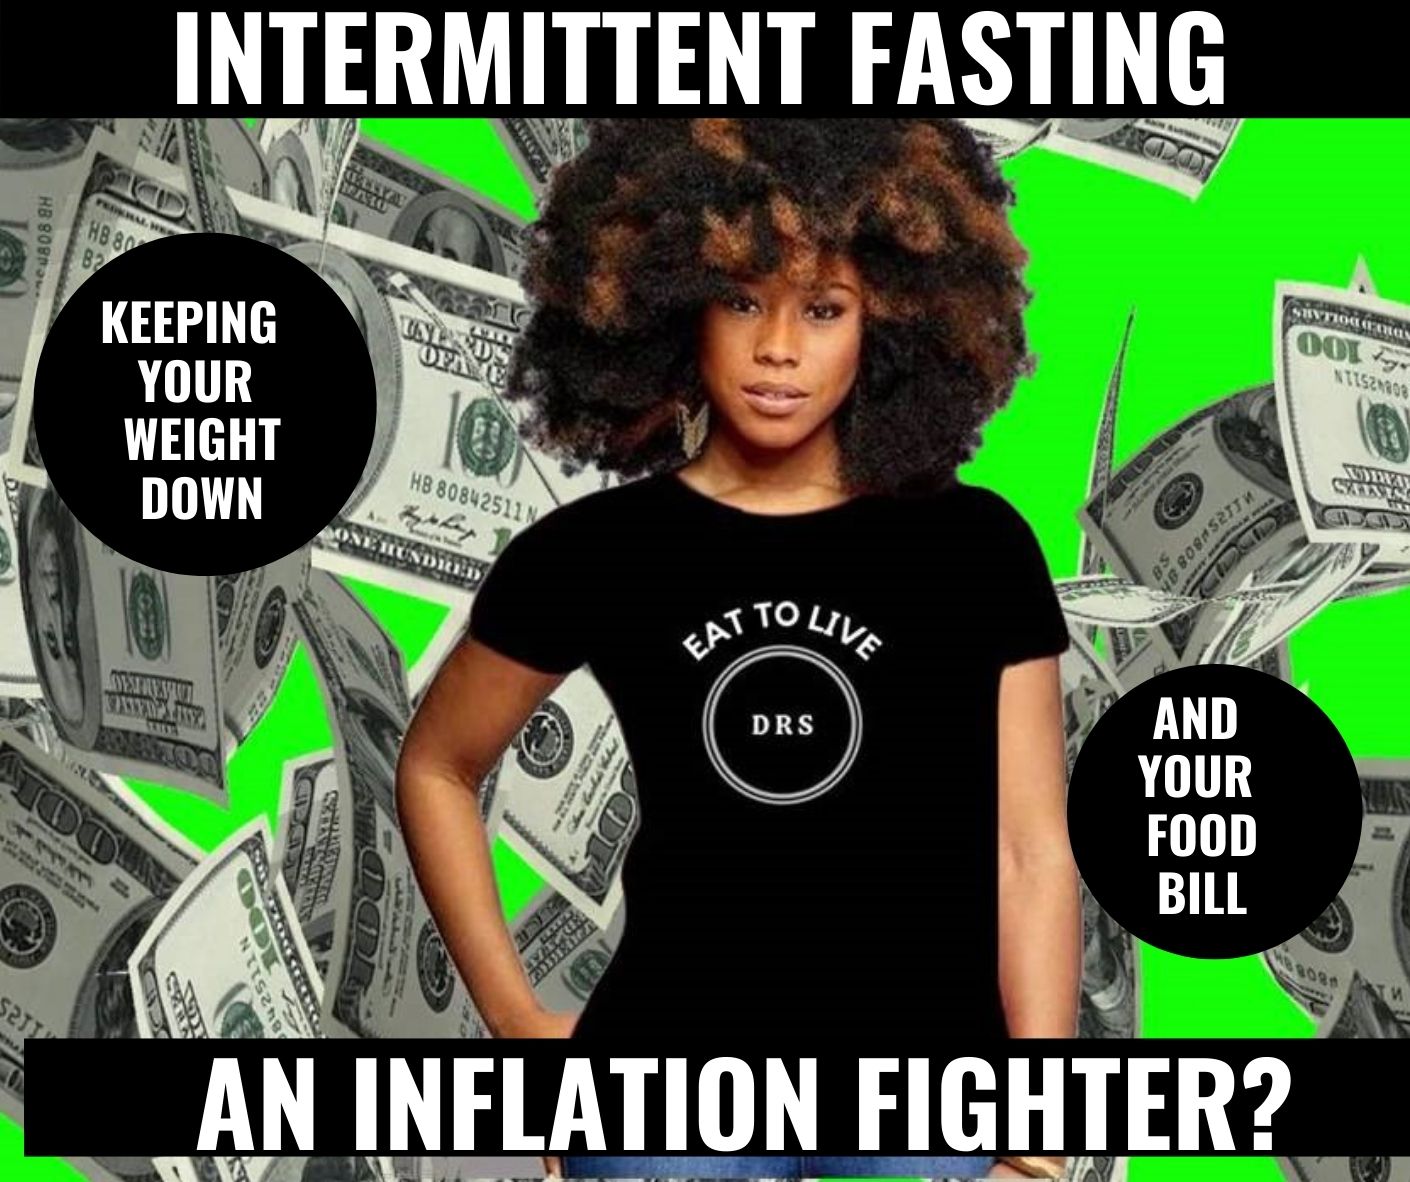 Fight Inflation with intermittent fasting